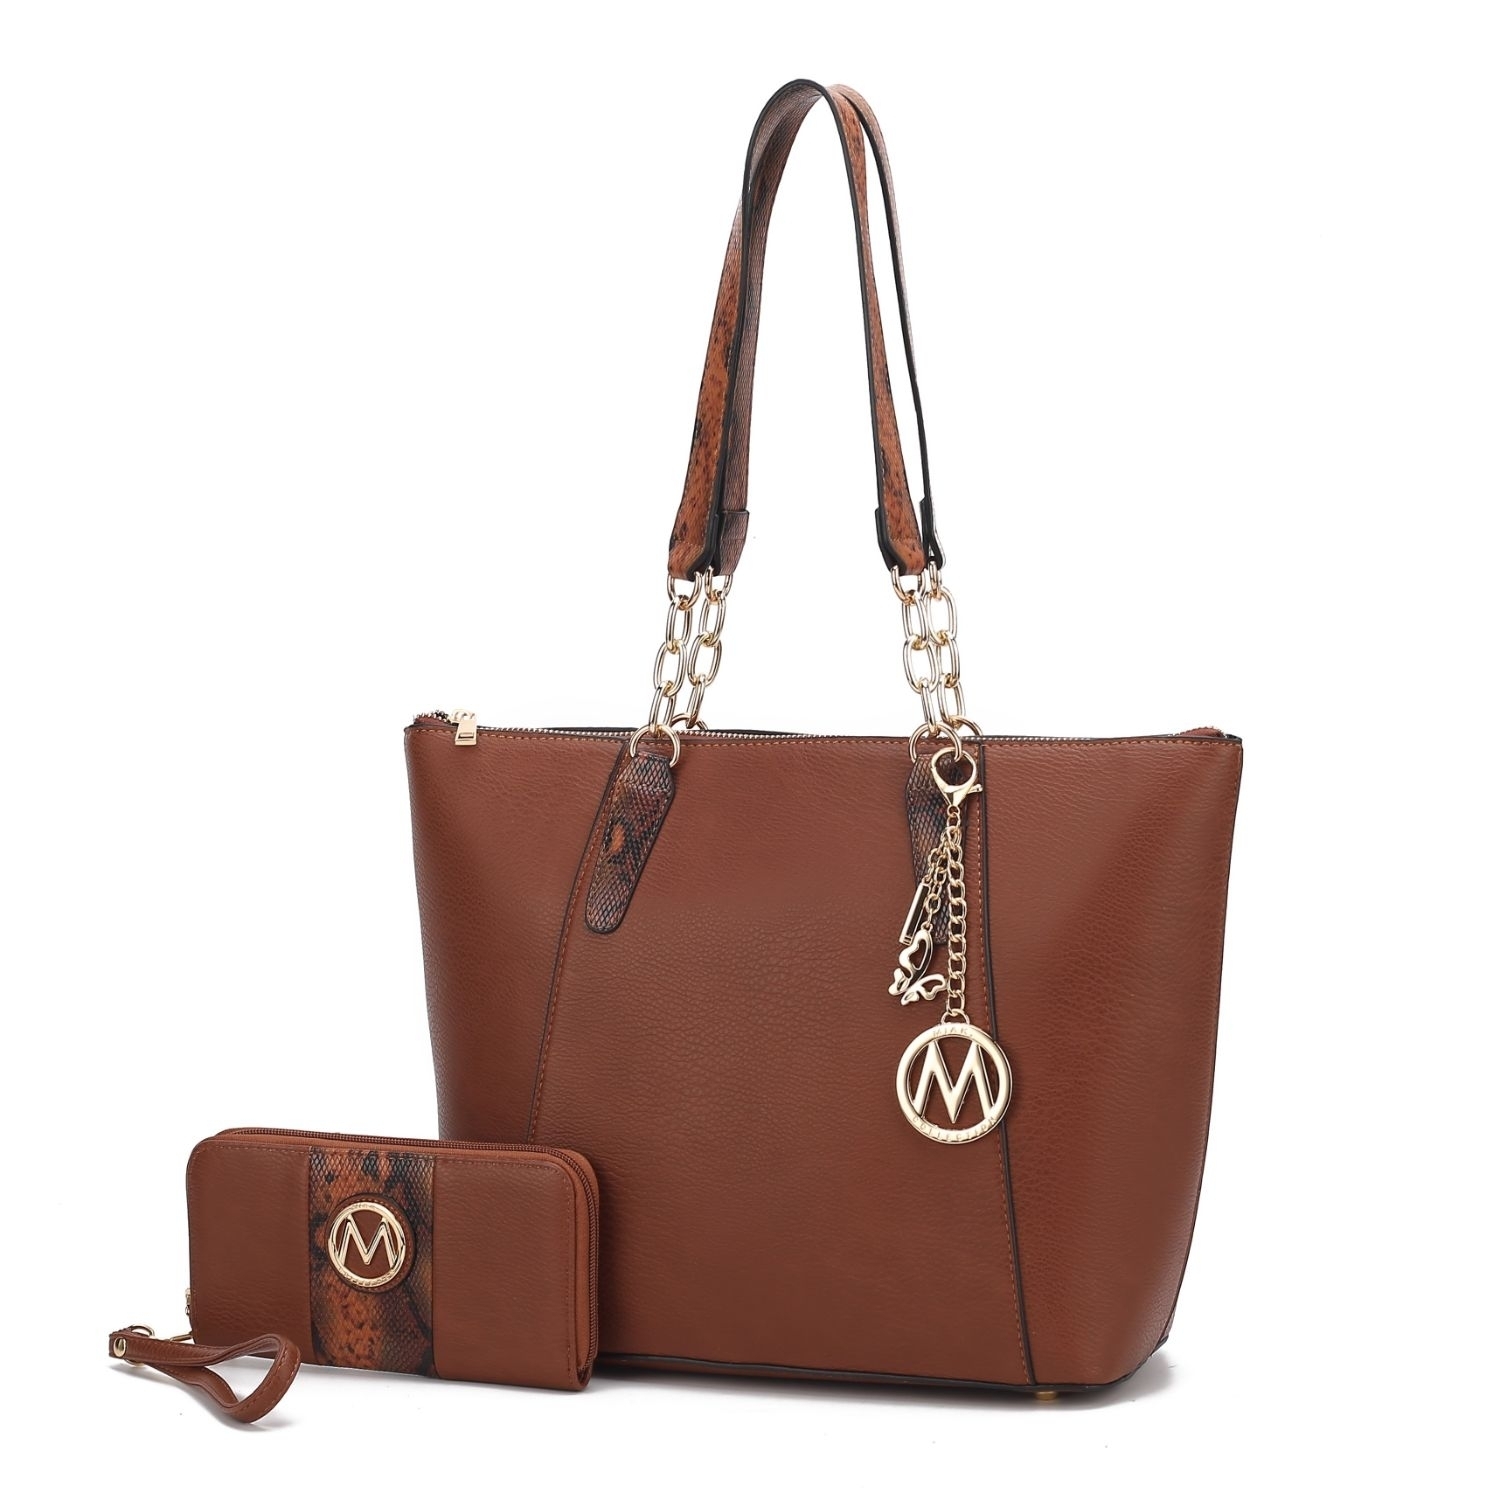 MKF Collection Ximena Vegan Leather Women's Tote Bag With Matching Wristlet Wallet - 2 Pieces By Mia K - Cognac